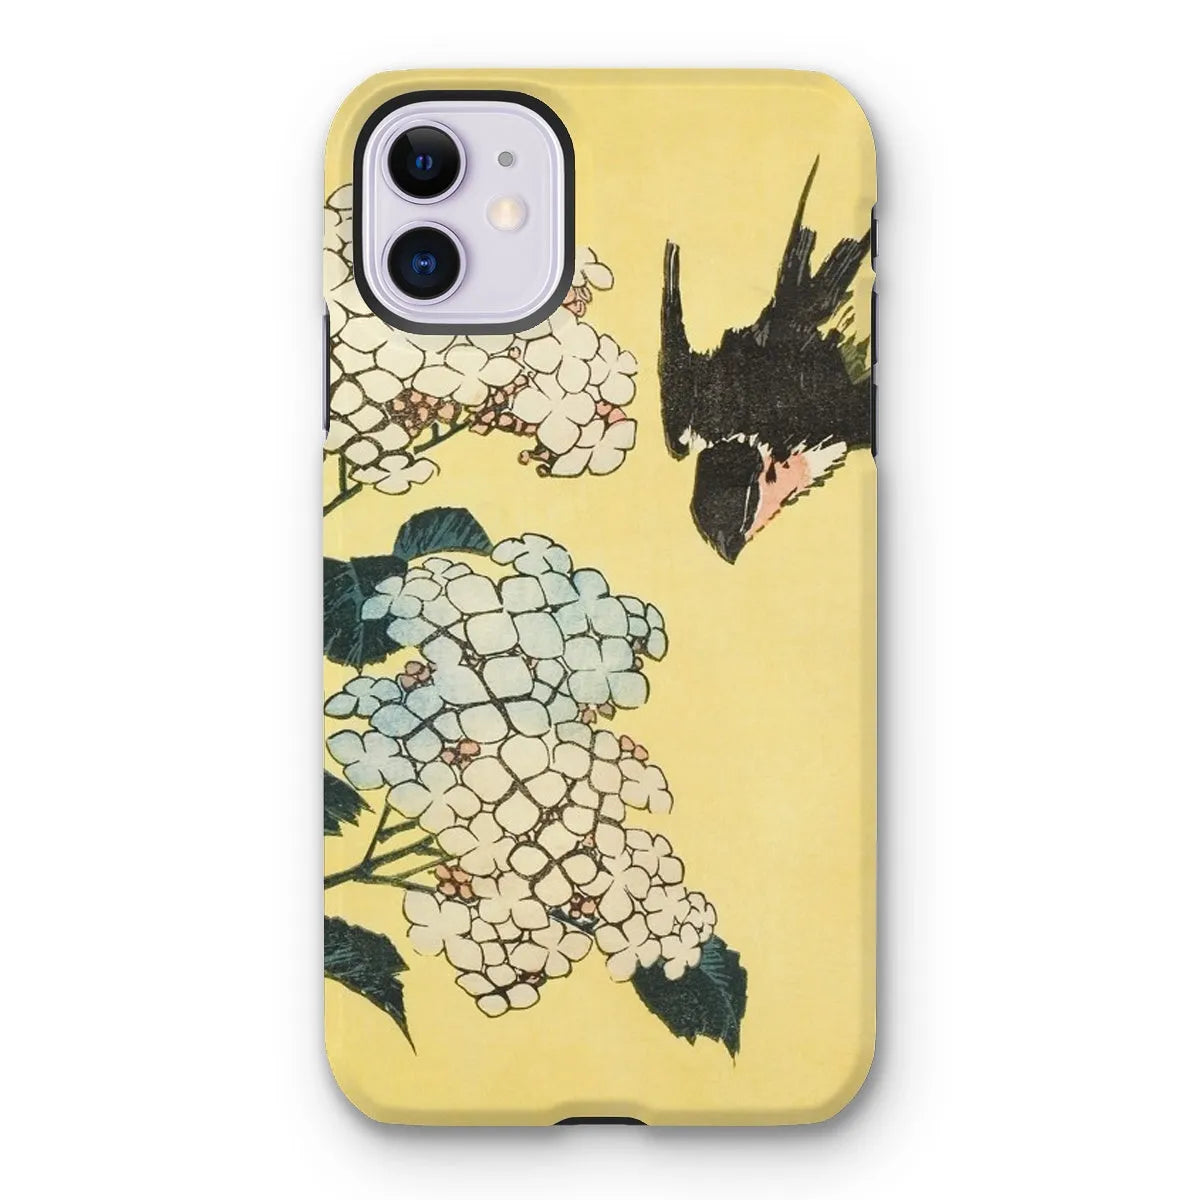 Hydrangea And Swallow - Japanese Art Phone Case - Hokusai - Iphone 11 / Matte - Mobile Phone Cases - Aesthetic Art